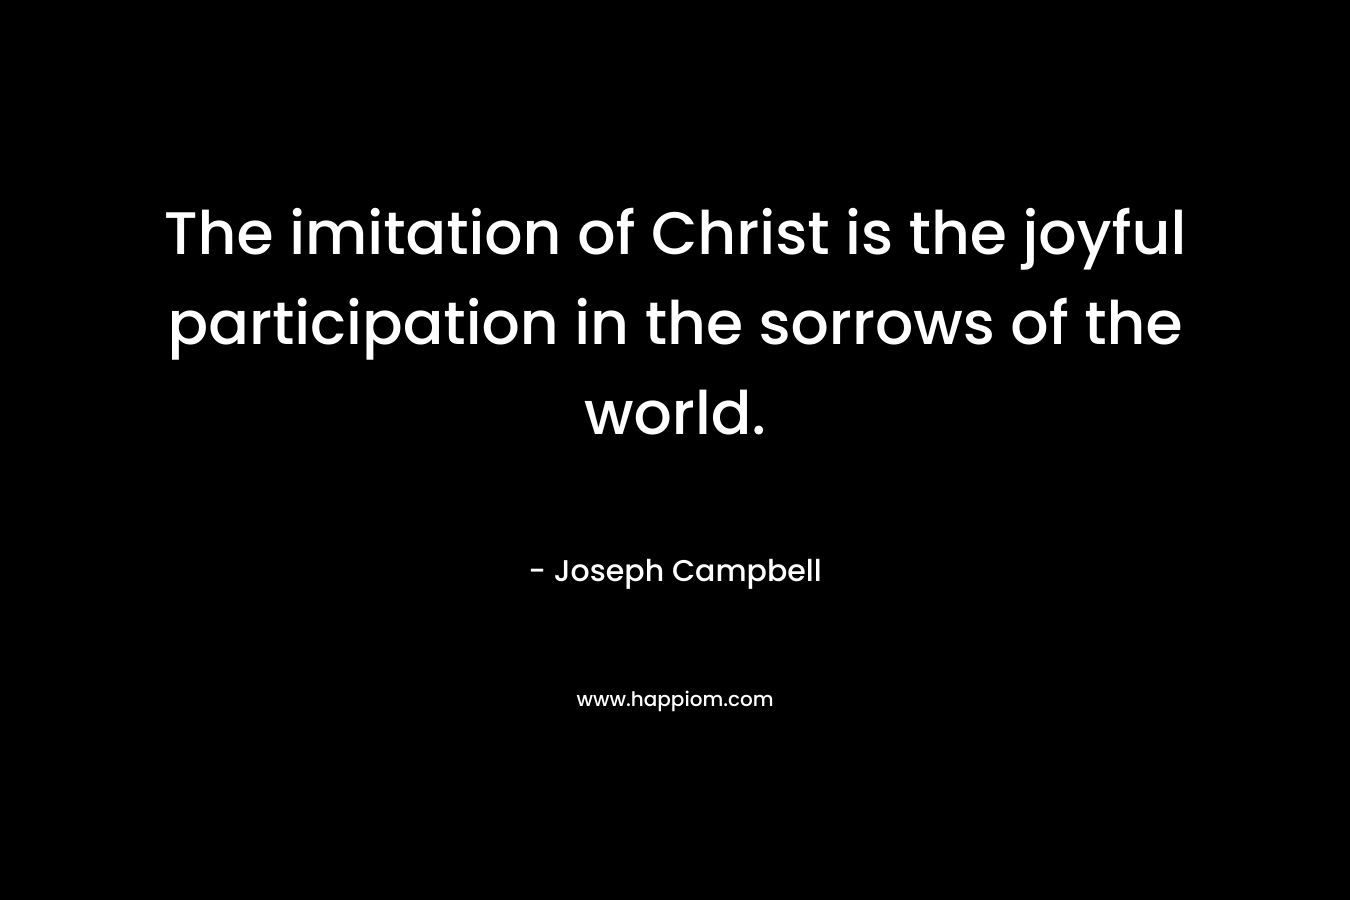 The imitation of Christ is the joyful participation in the sorrows of the world.